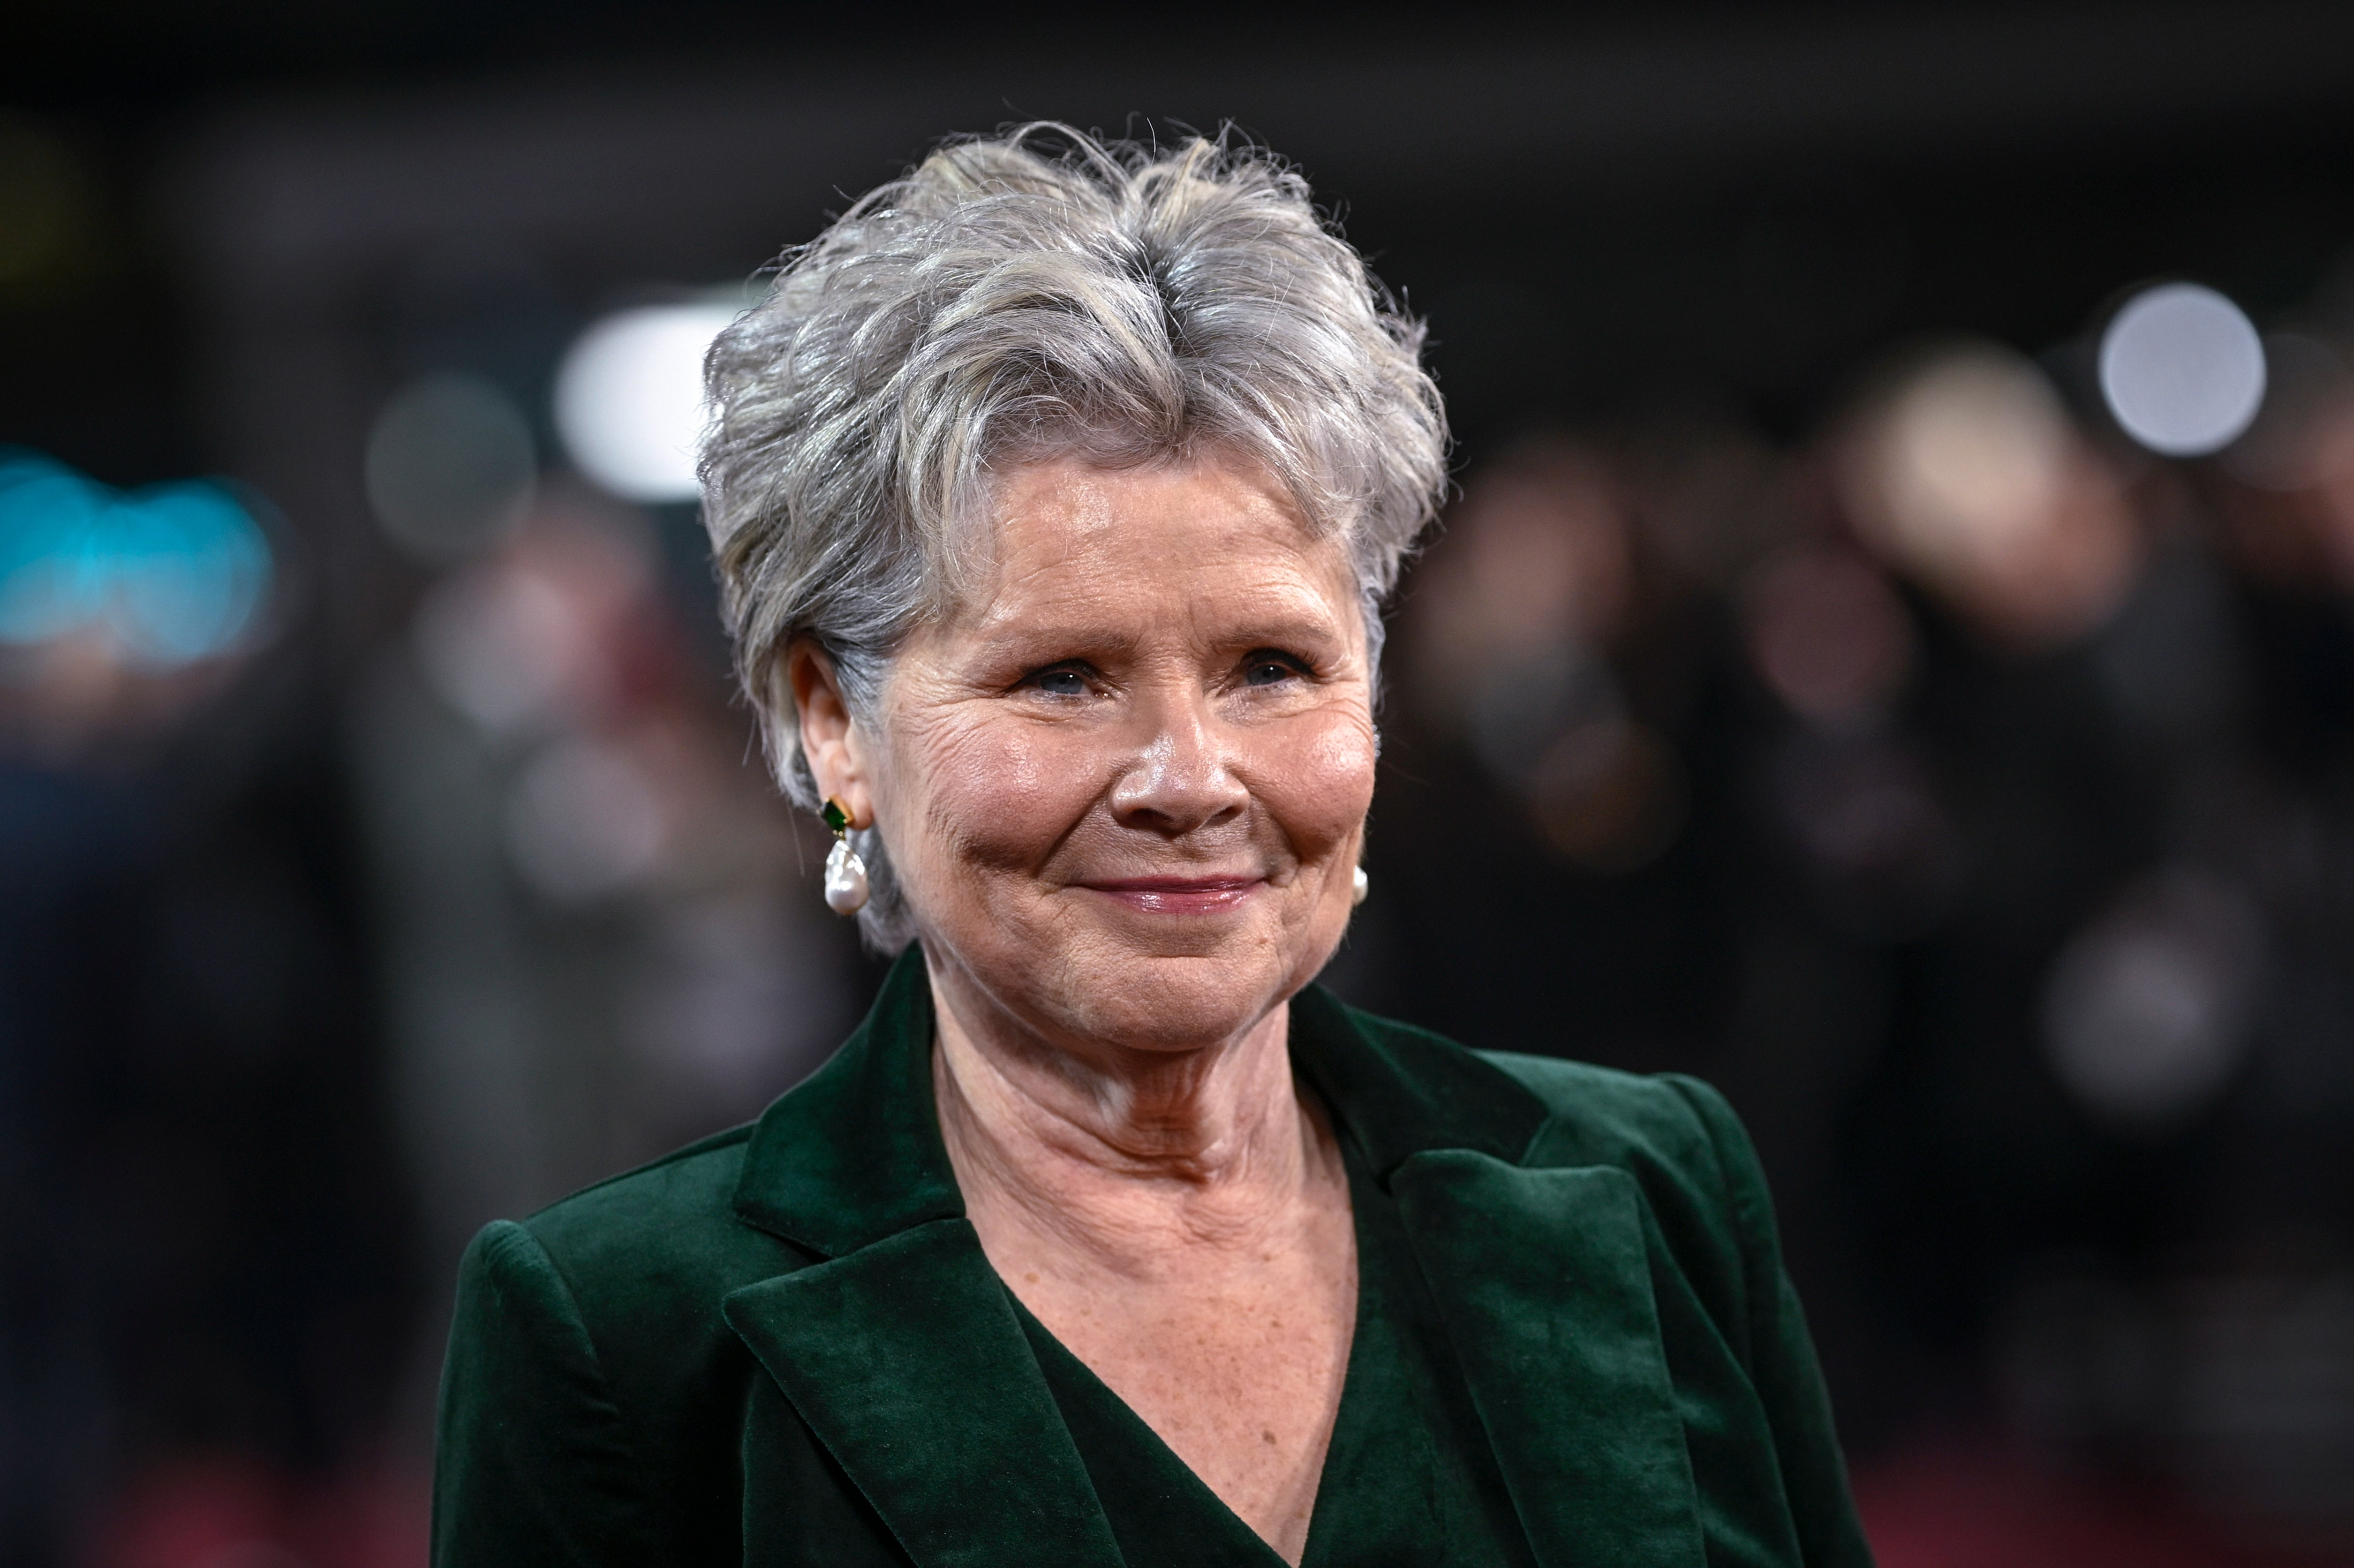 ‘The Crown’ actor Imelda Staunton said she was ‘thrilled’ to be made a dame for her services to drama and charity